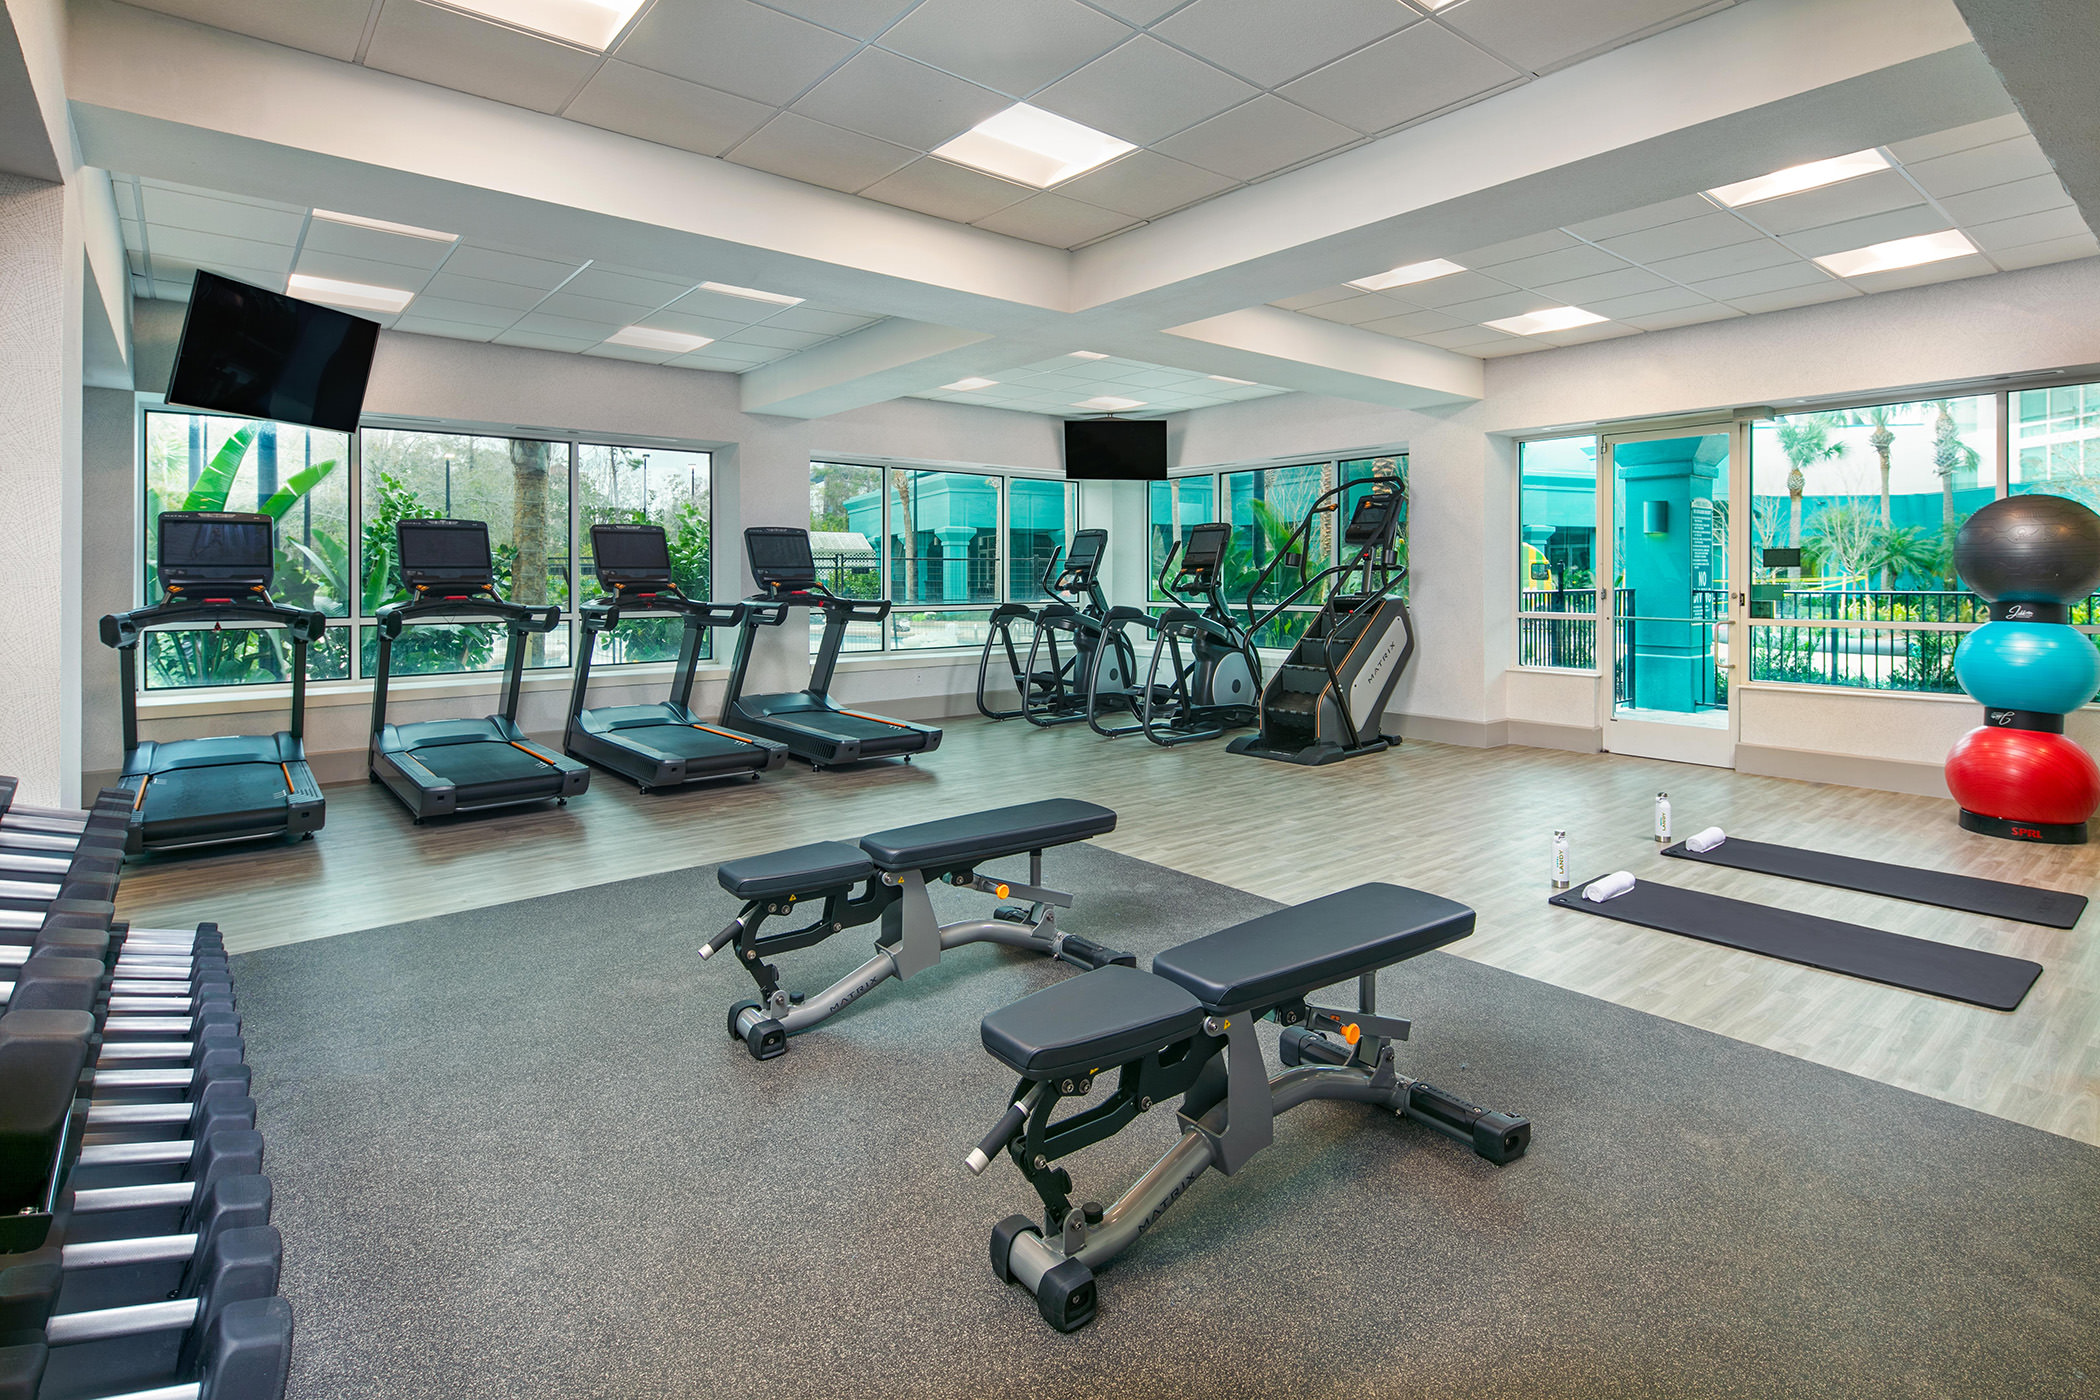 The fitness room at Hotel Landy with exercise equipment